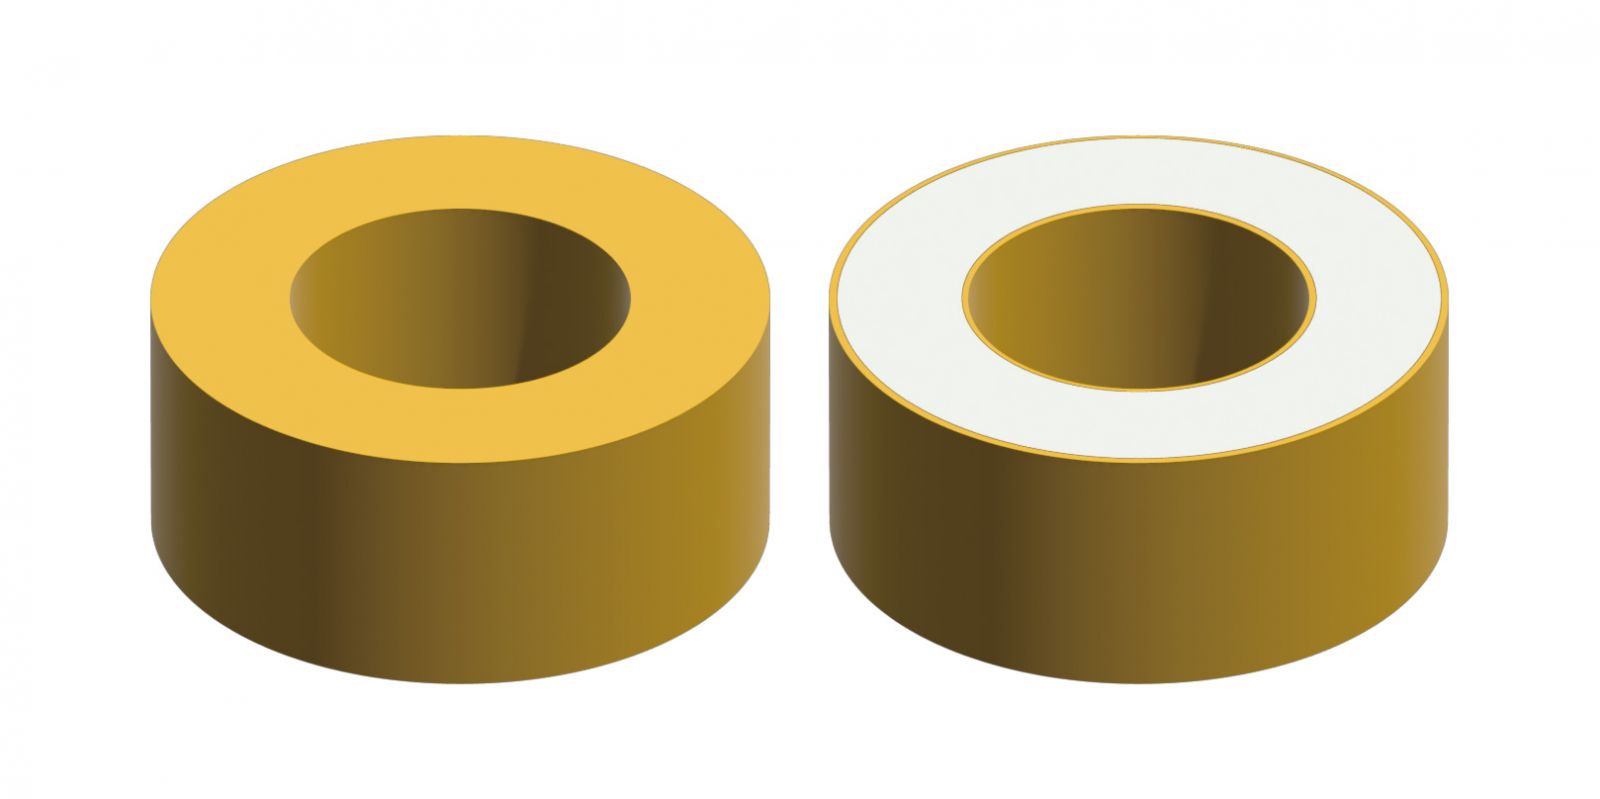 26 material-GOTREND Article-What does the color of the inductor ring mean? High conductivity ring